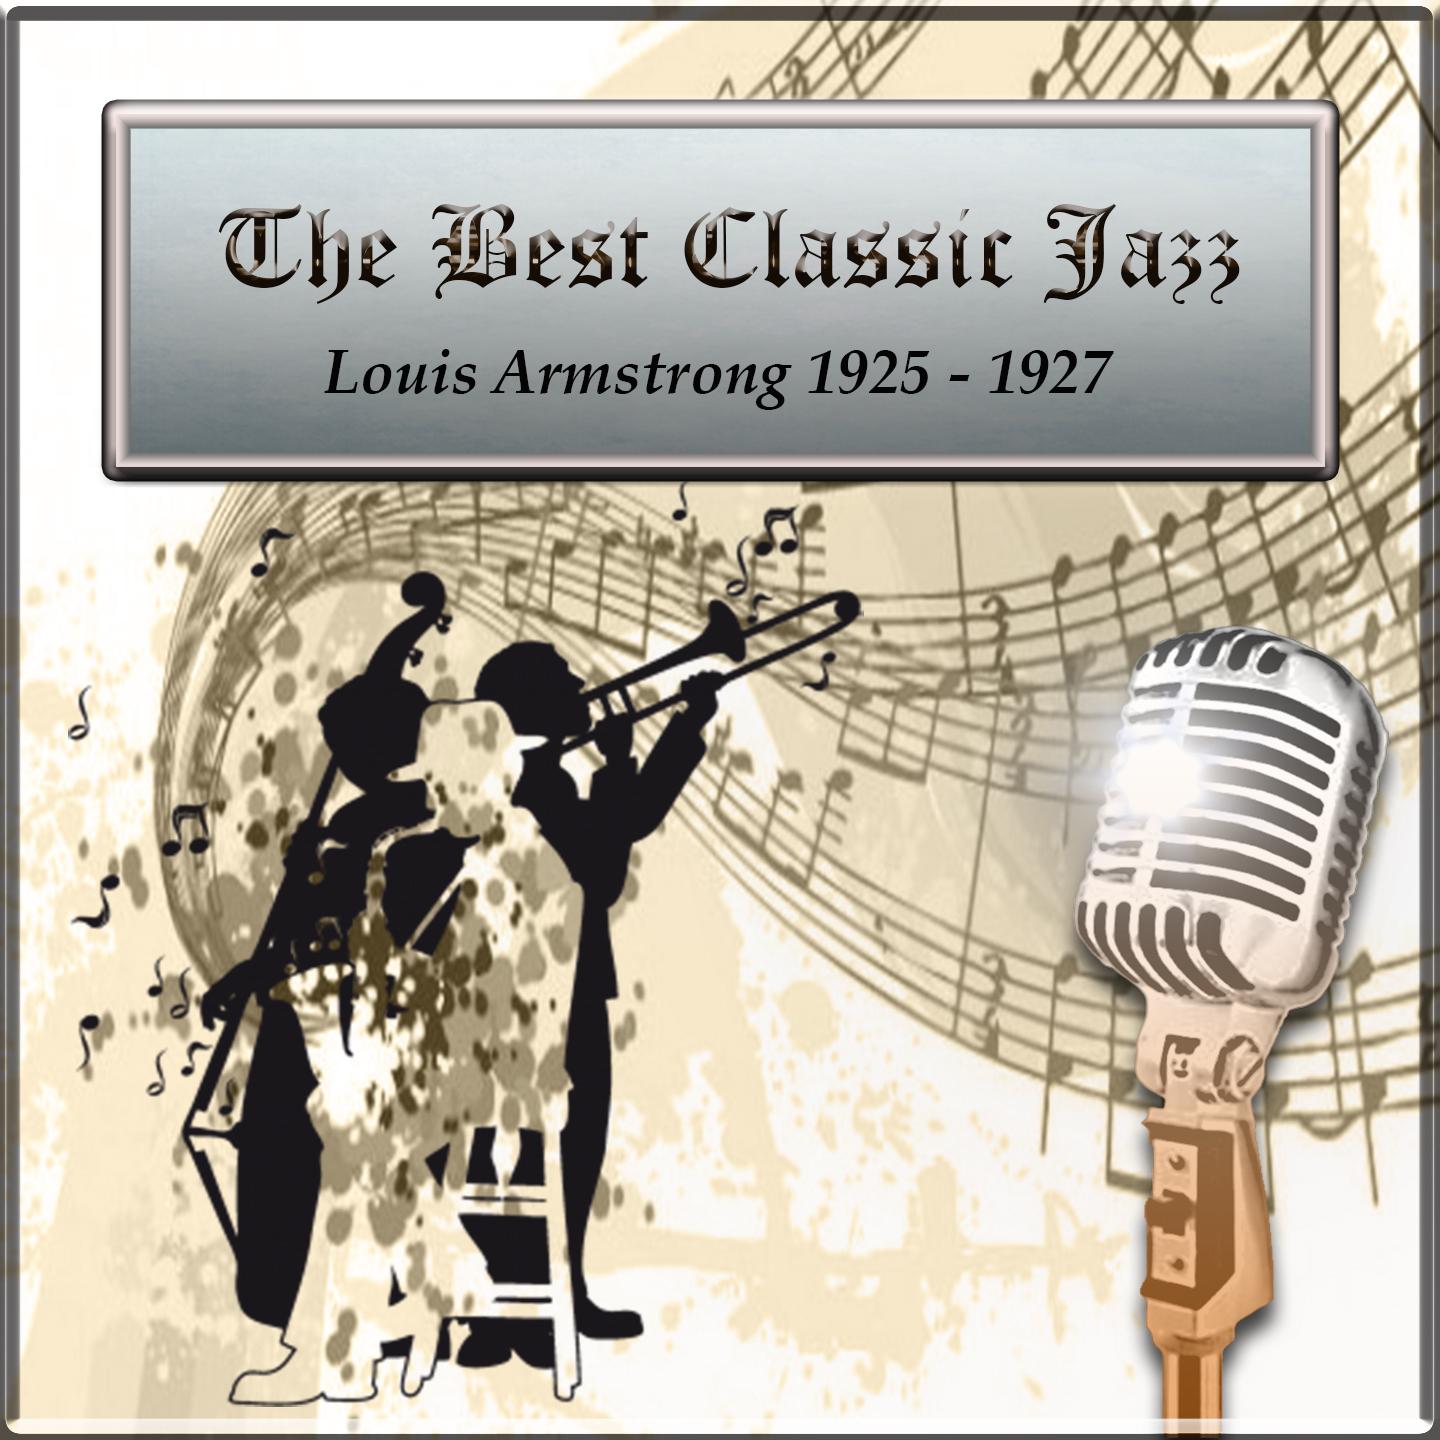 The Best Classic Jazz, Louis Armstrong 1925 - 1927